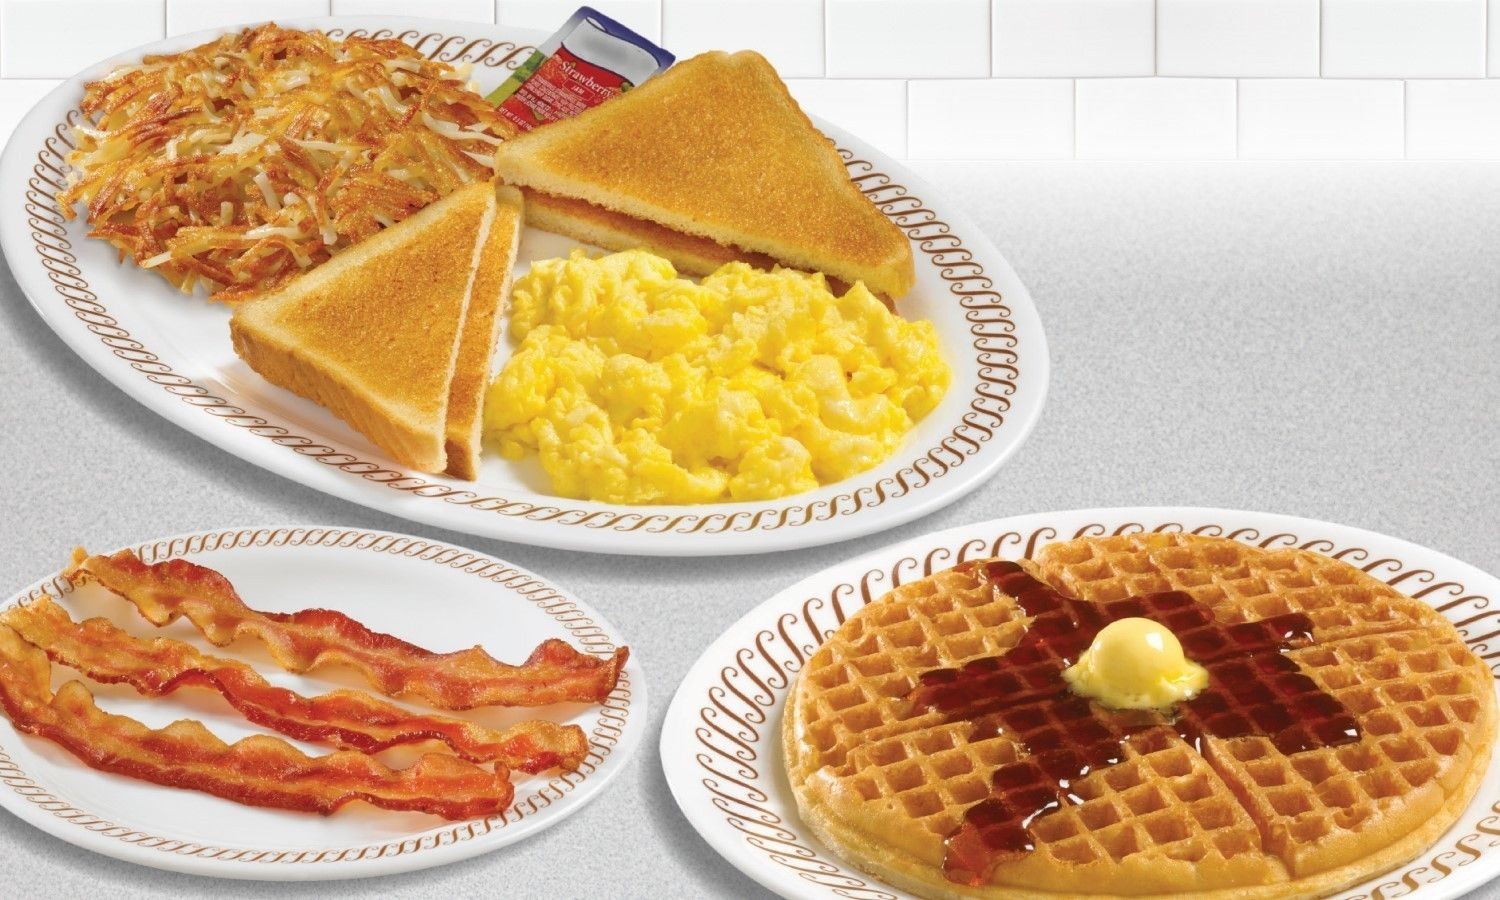 How many calories are in a Waffle House All Star Breakfast?